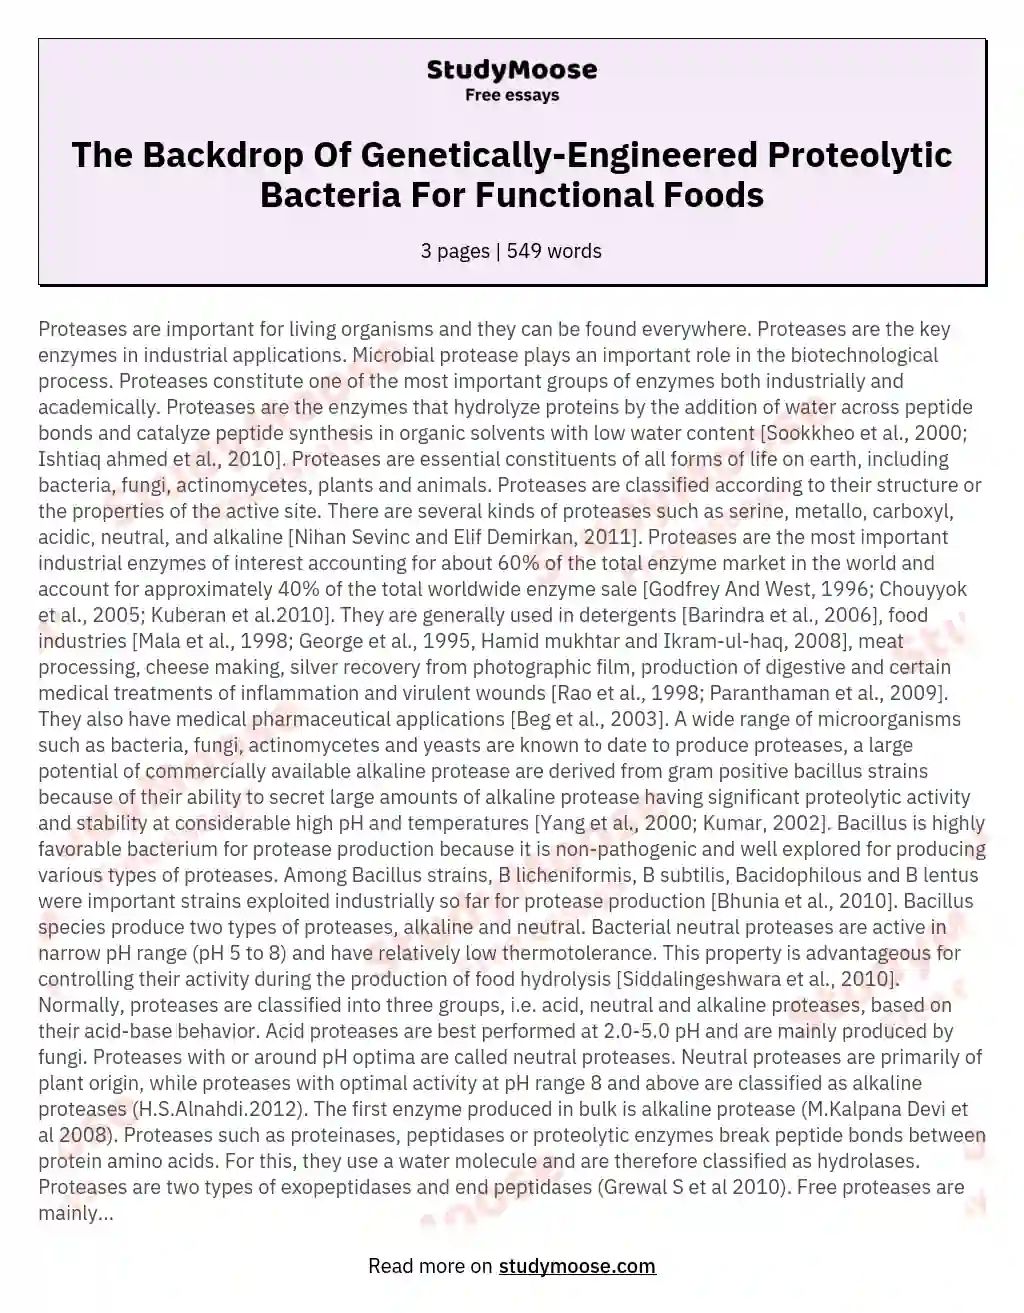 The Backdrop Of Genetically-Engineered Proteolytic Bacteria For Functional Foods essay